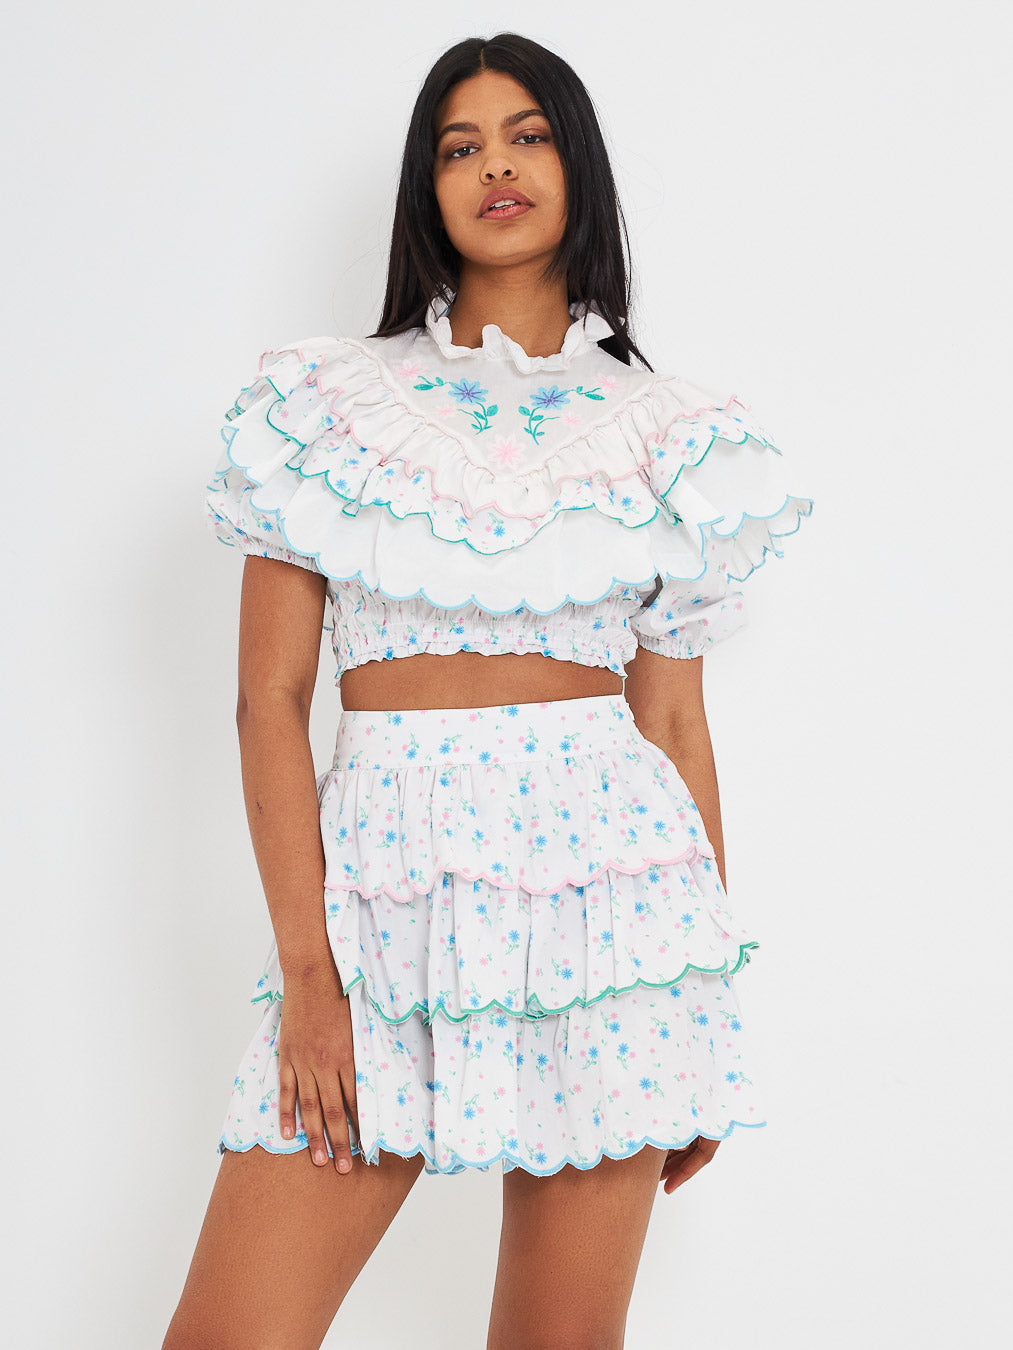 Glamorous coordinated white crop top and skirt with flowers